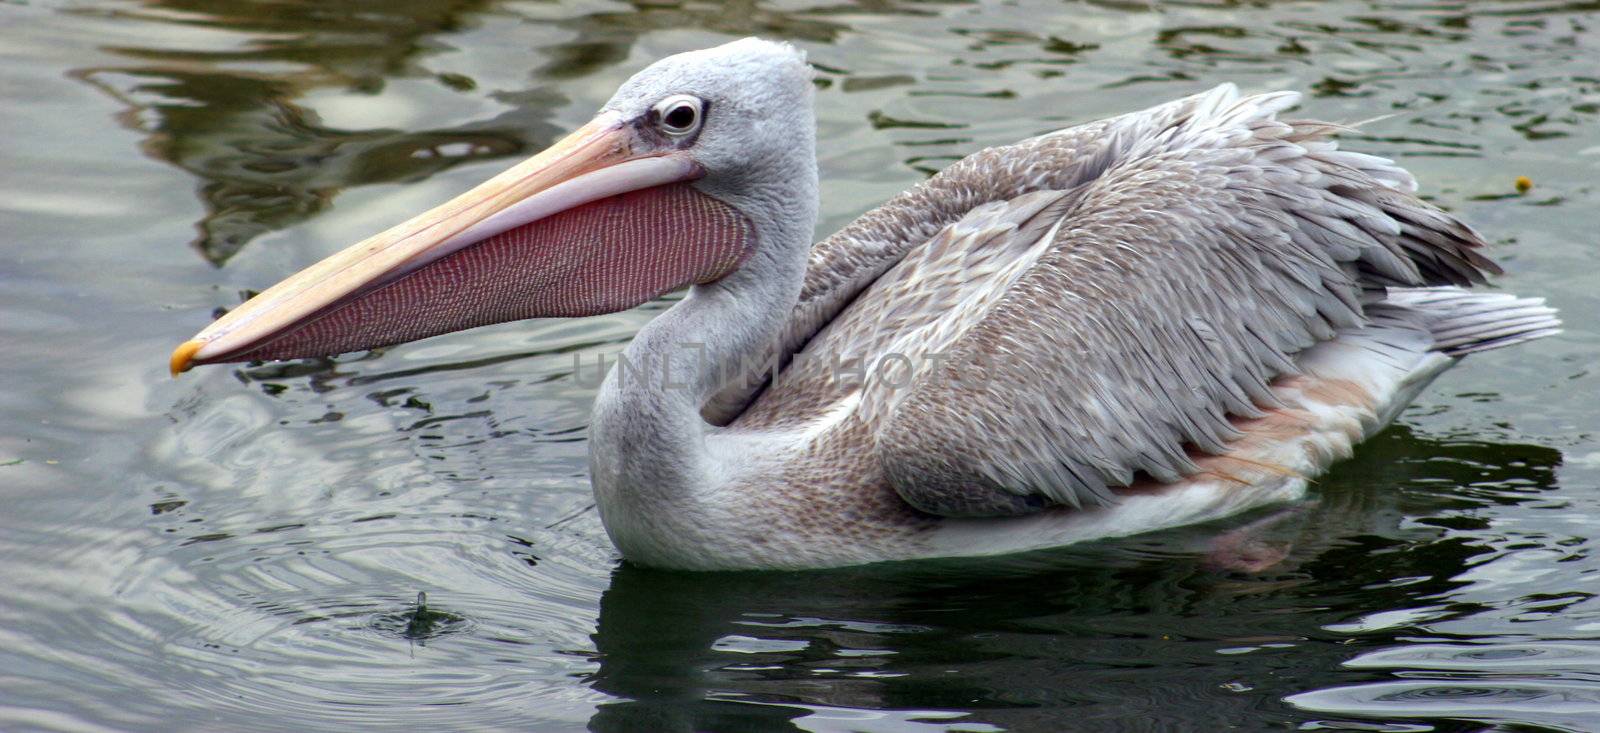 A pelican in a lake looking for food.